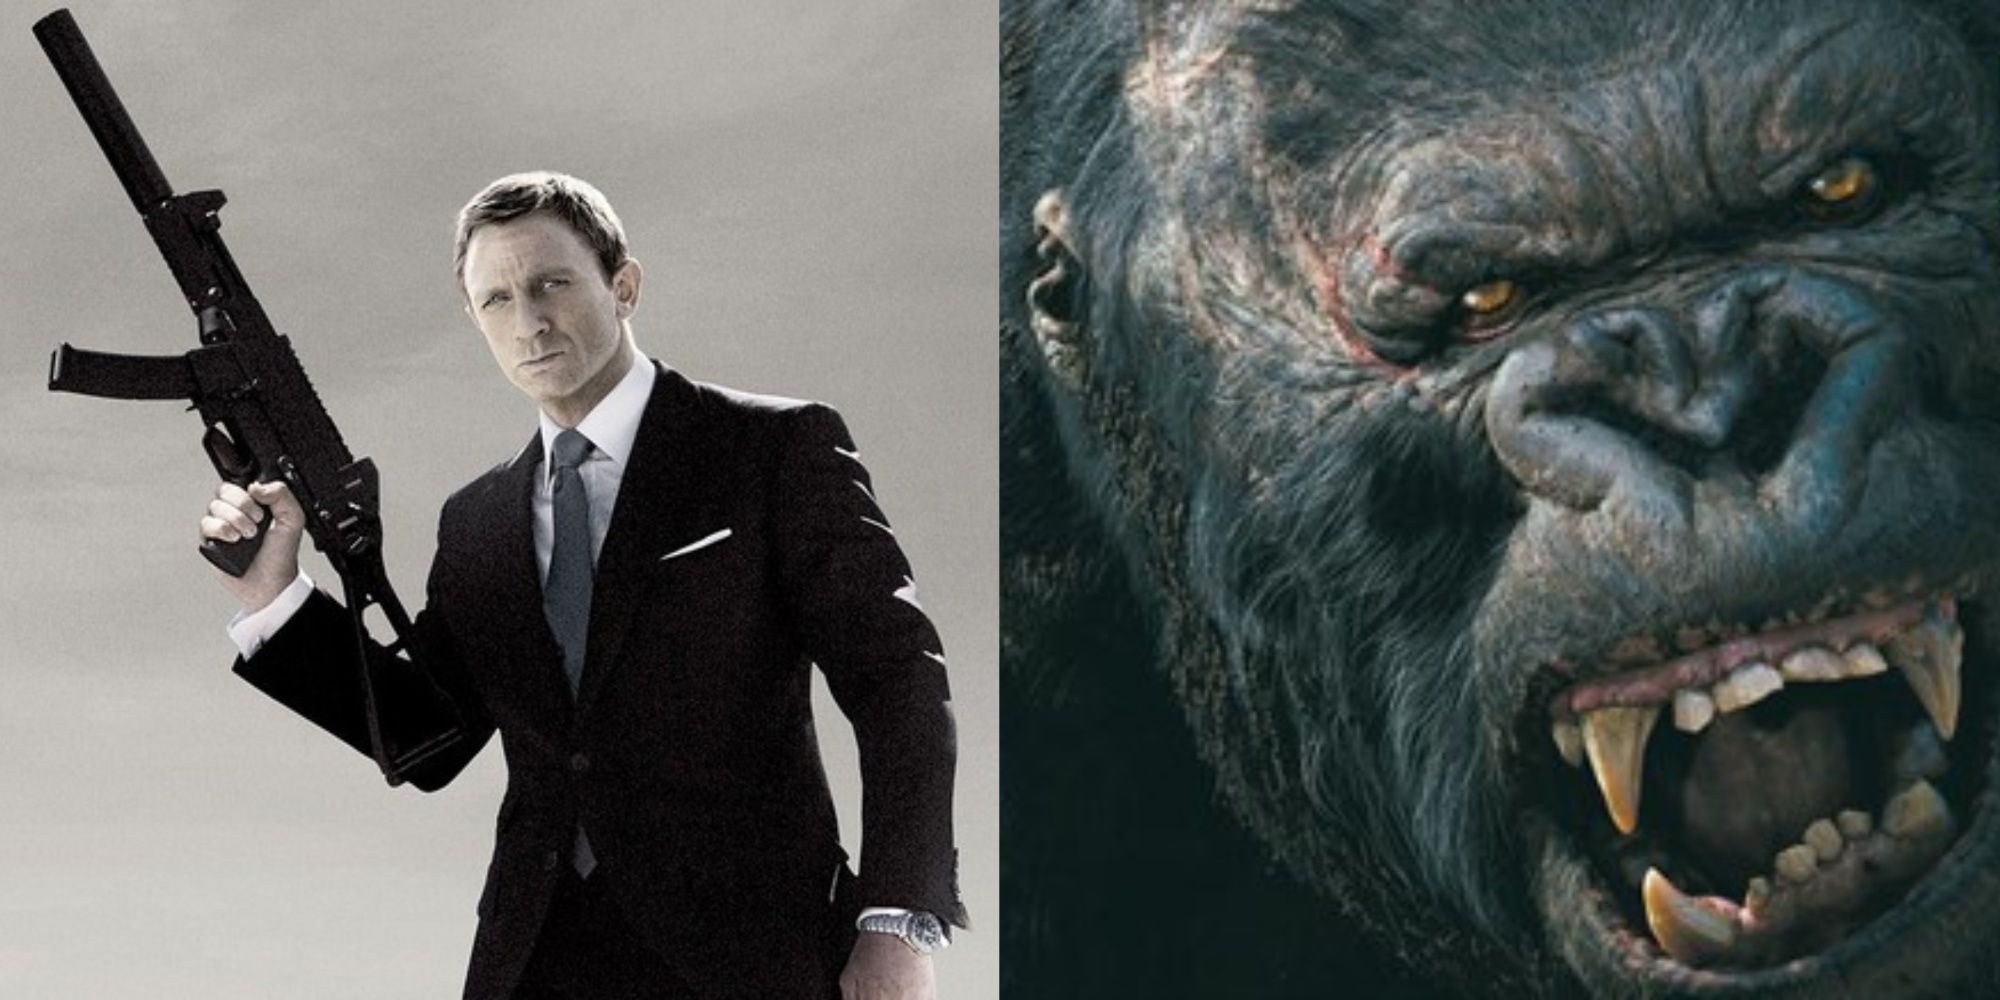 Box art to Quantum of Solace and King Kong 360